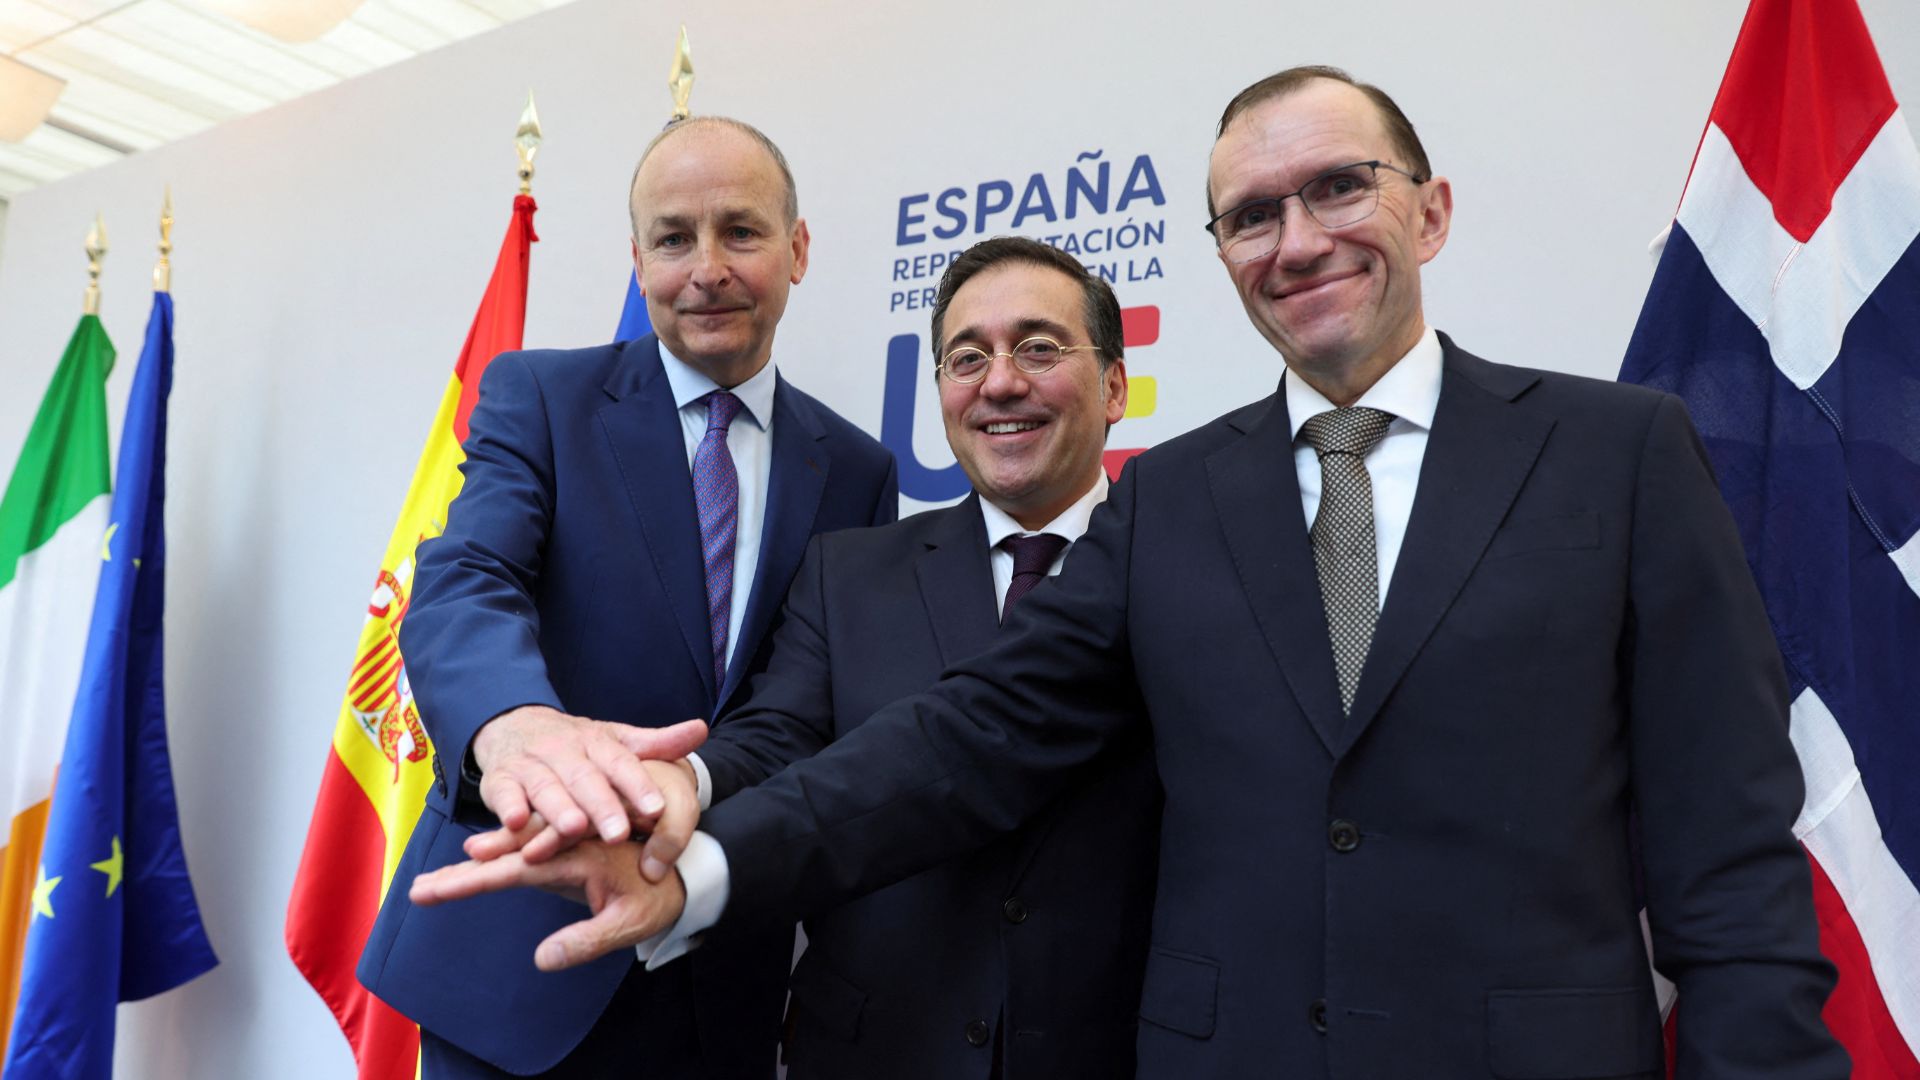 Spanish Foreign Minister Jose Manuel Albares, Norway's Foreign Minister Espen Barth Eide and Ireland's Foreign Minister Micheal Martin gesture after a press conference in Brussels. /Johanna Geron/Reuters